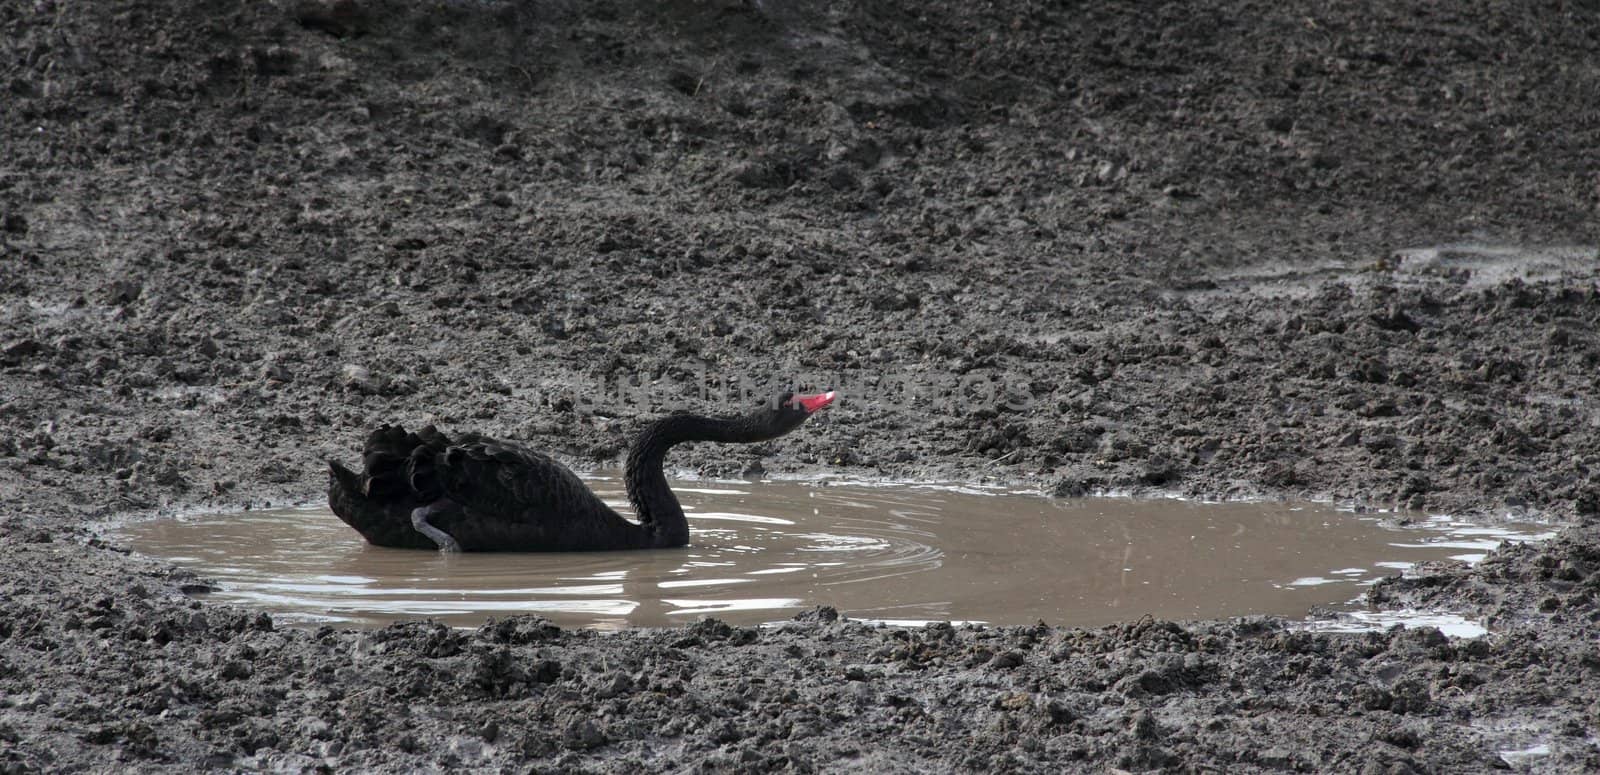 A black swan swims in a pond.